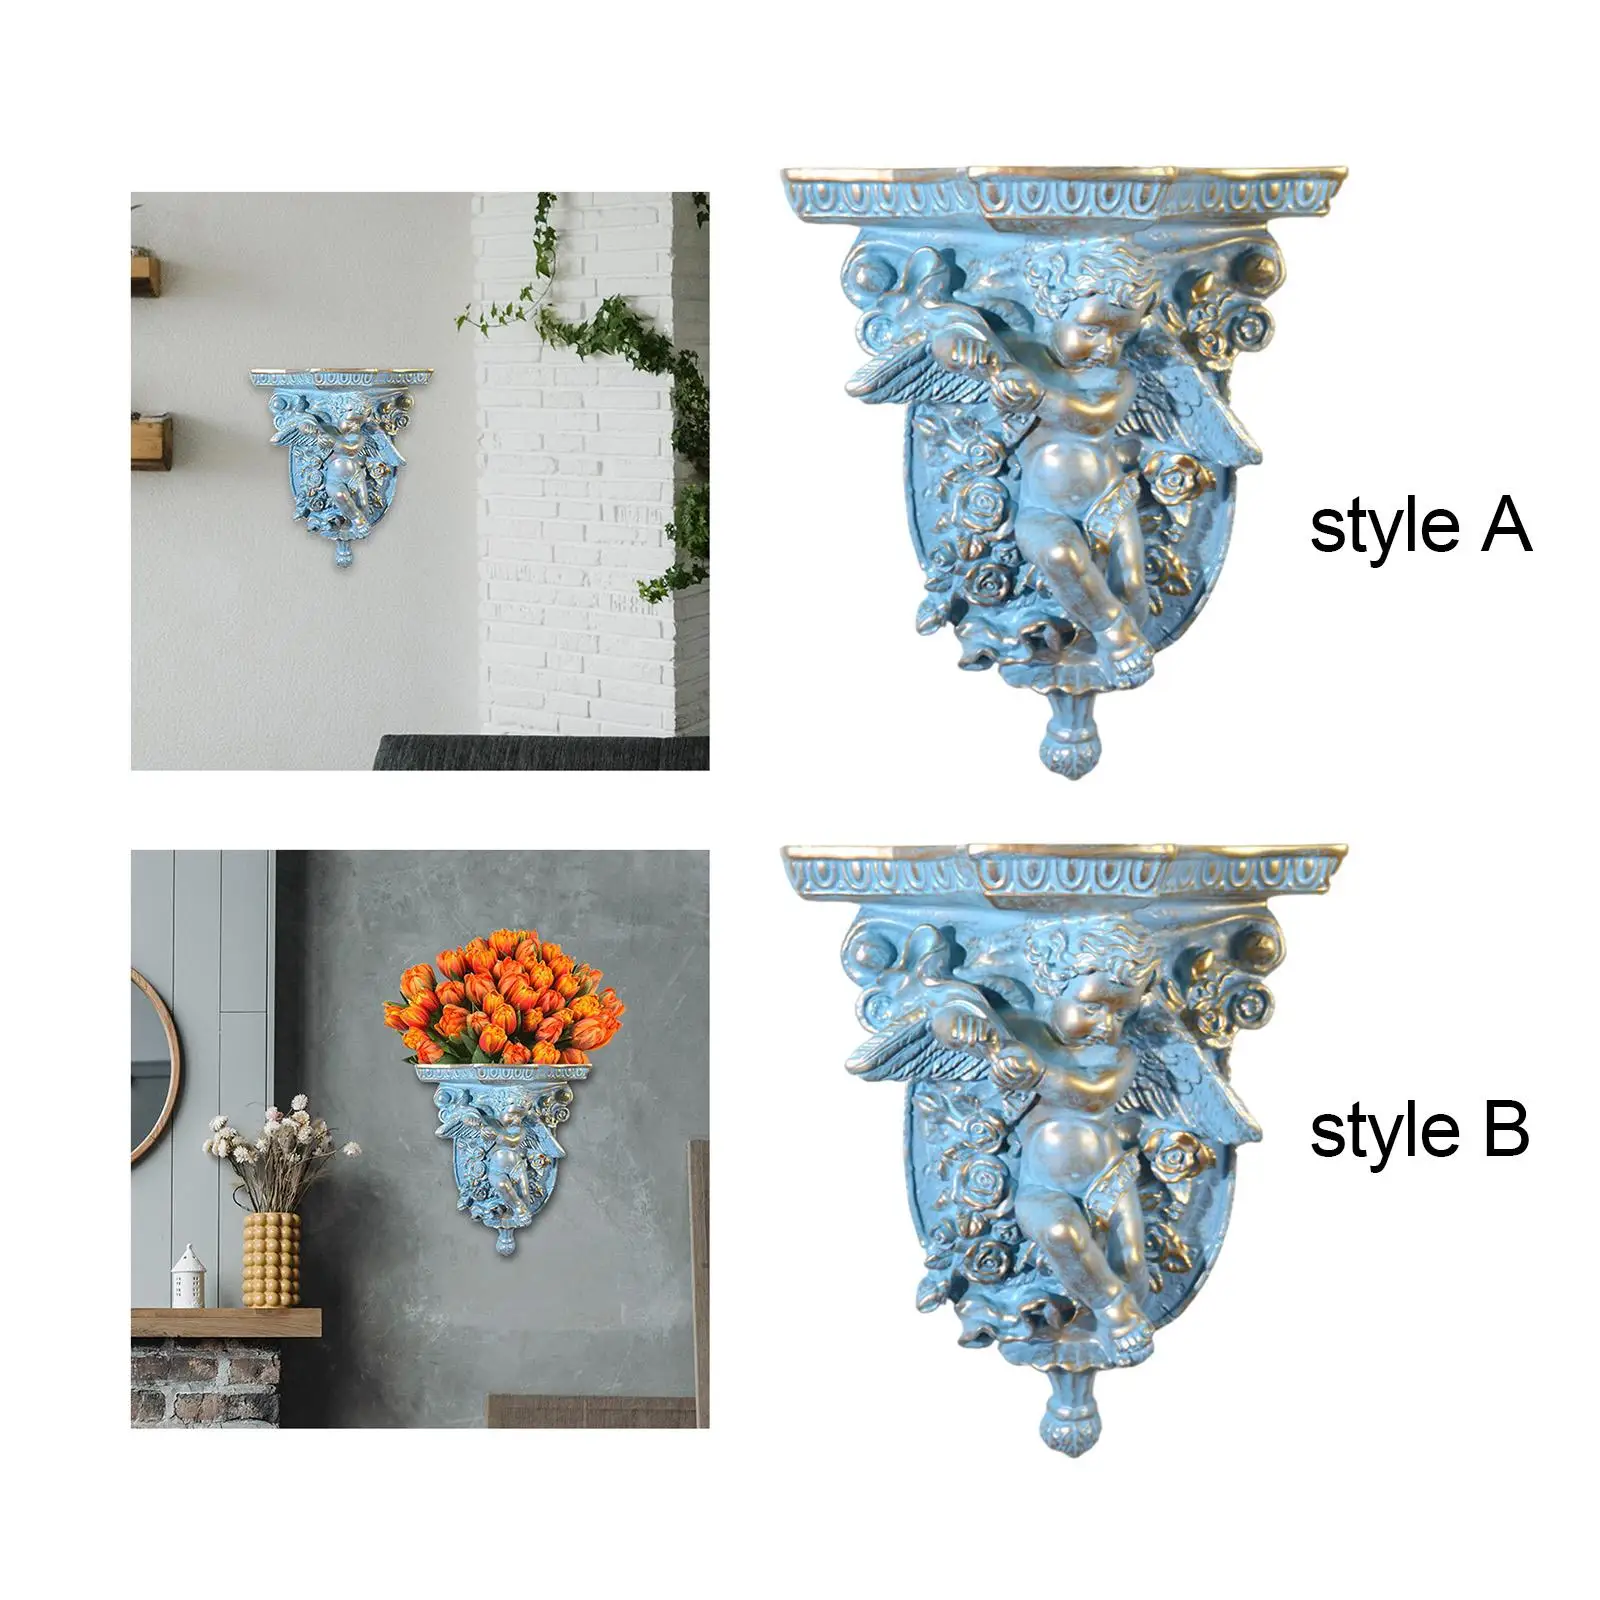 Vintage style Floating Shelf Decorative Hollow Flower Carving Wall Art Display Shelves Wall Organizer for Office Hallway